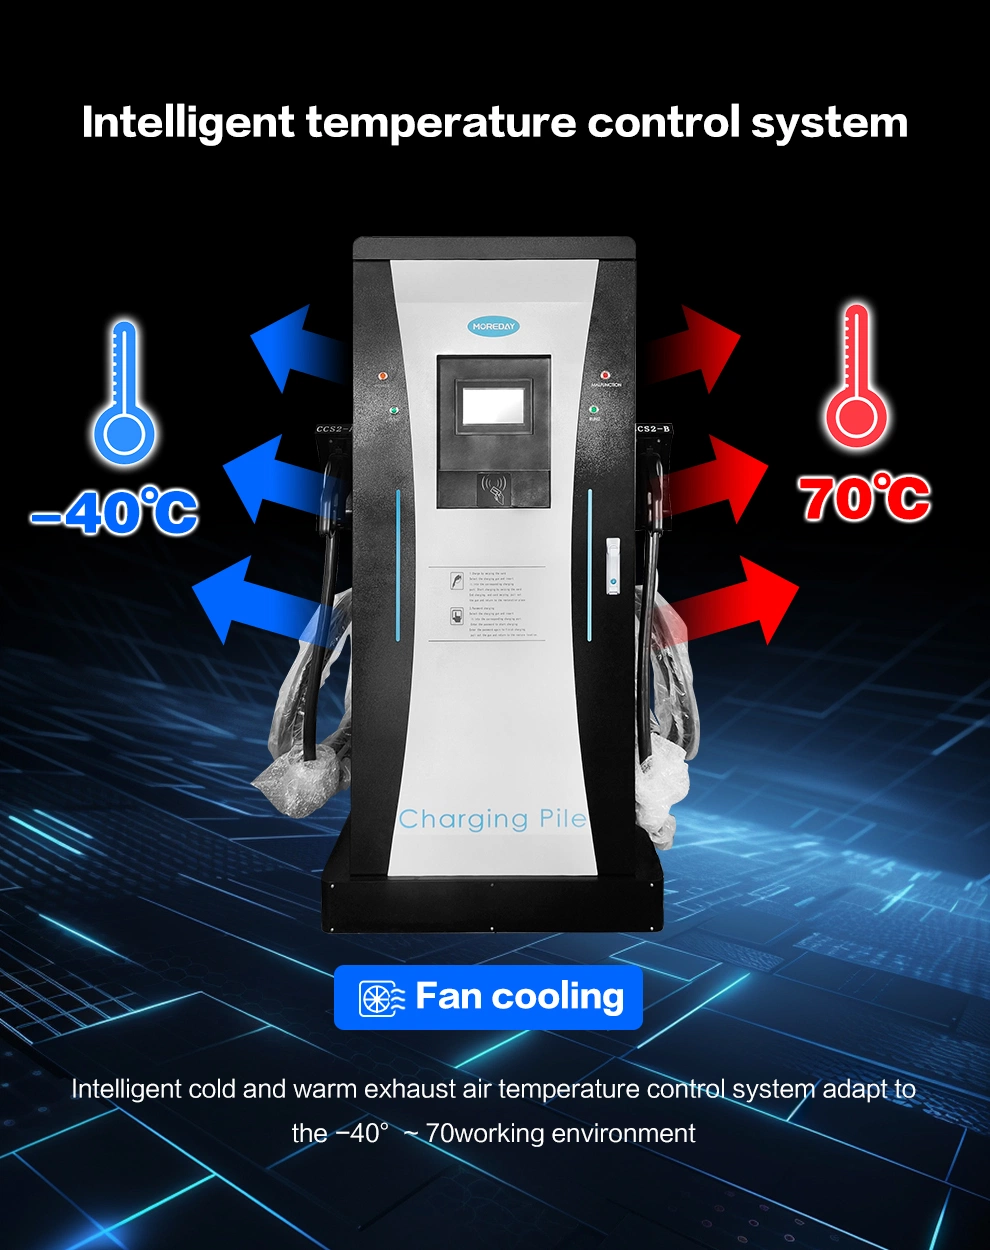 Hot Sale DC EV Charging Station Chademo CCS 60kw Electric Car Charger Ocpp EV DC Fast Charger with 1000V Output Voltage